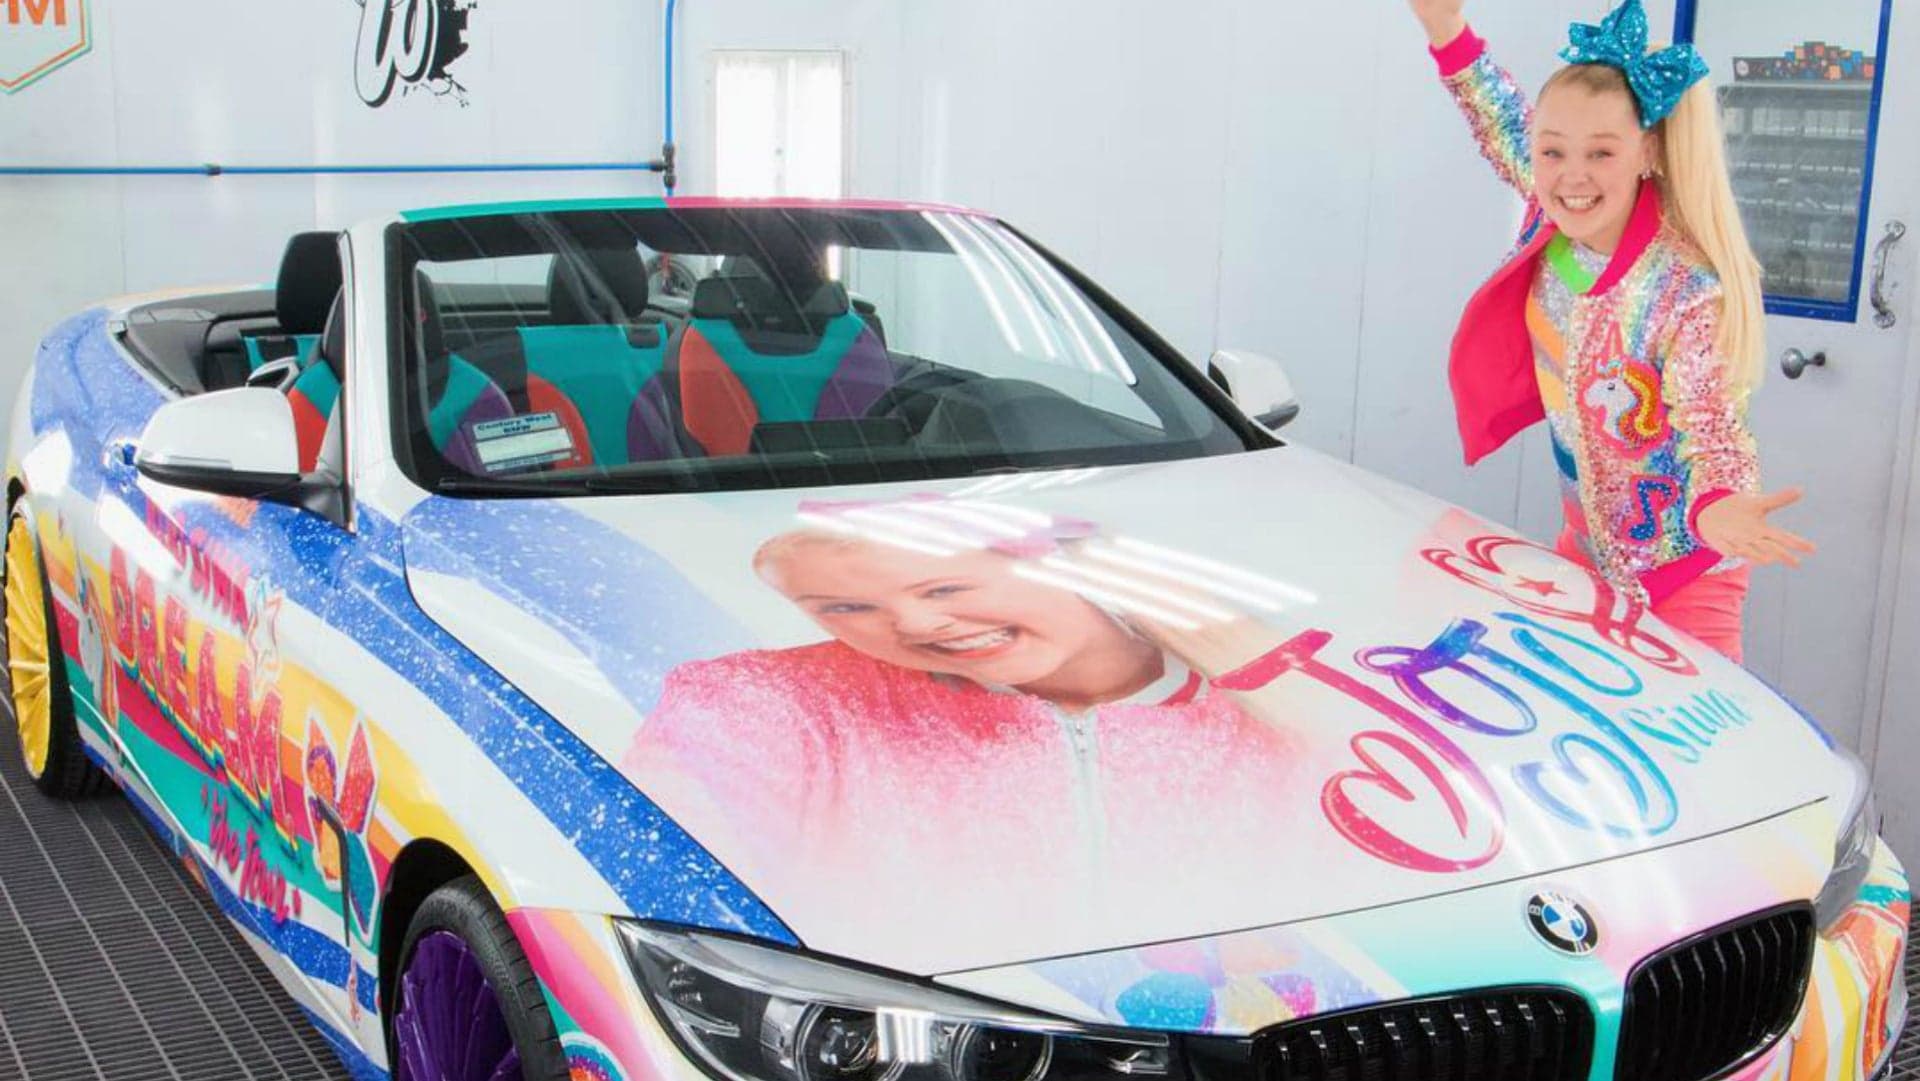 Justin Bieber Sorry After Suggesting Teenaged Nickelodeon Star’s BMW Be Cleansed With Fire